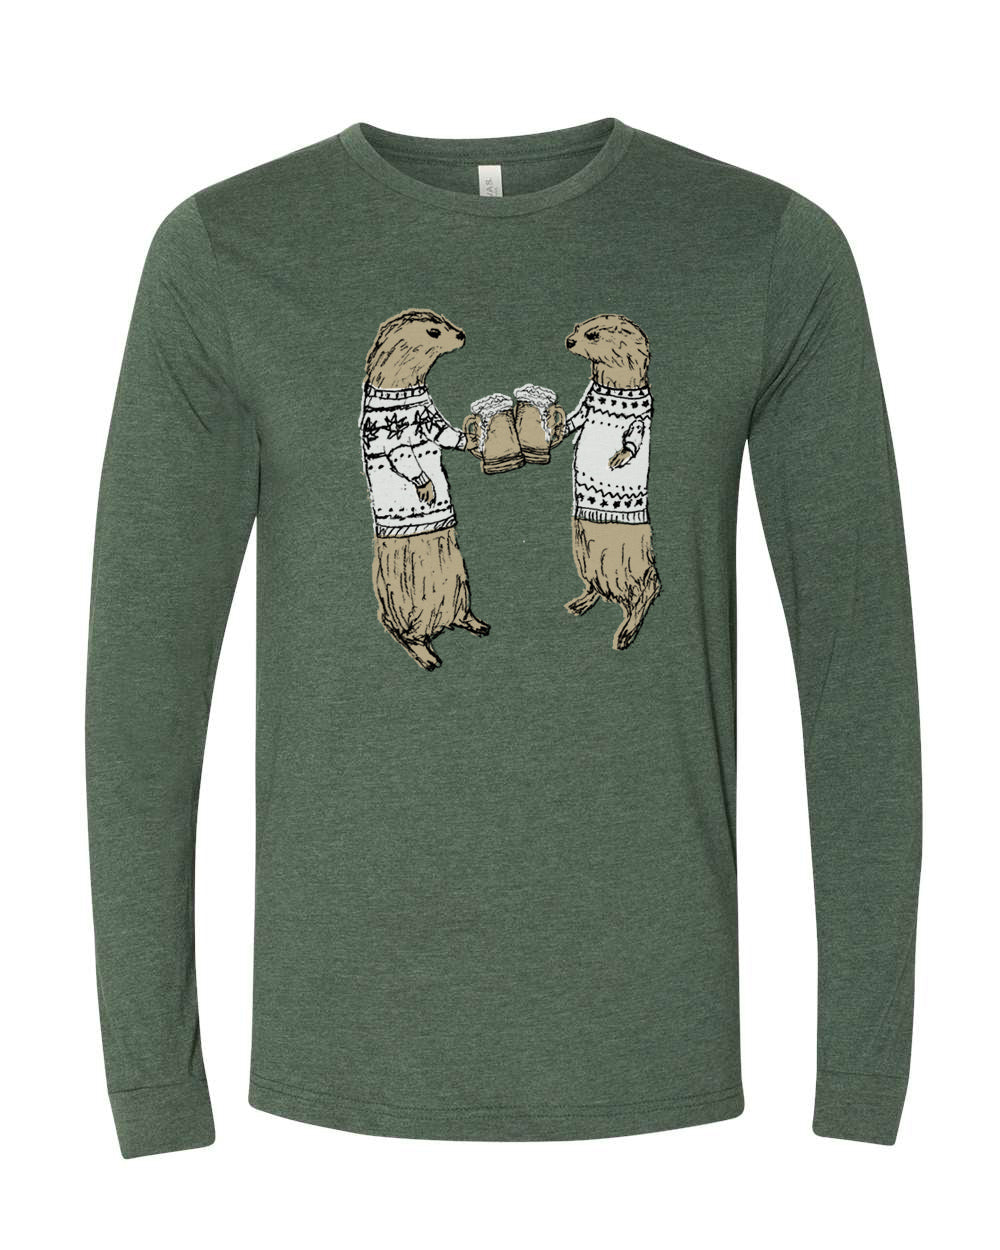 Otters : Unisex Long Sleeve (Heather Forest)